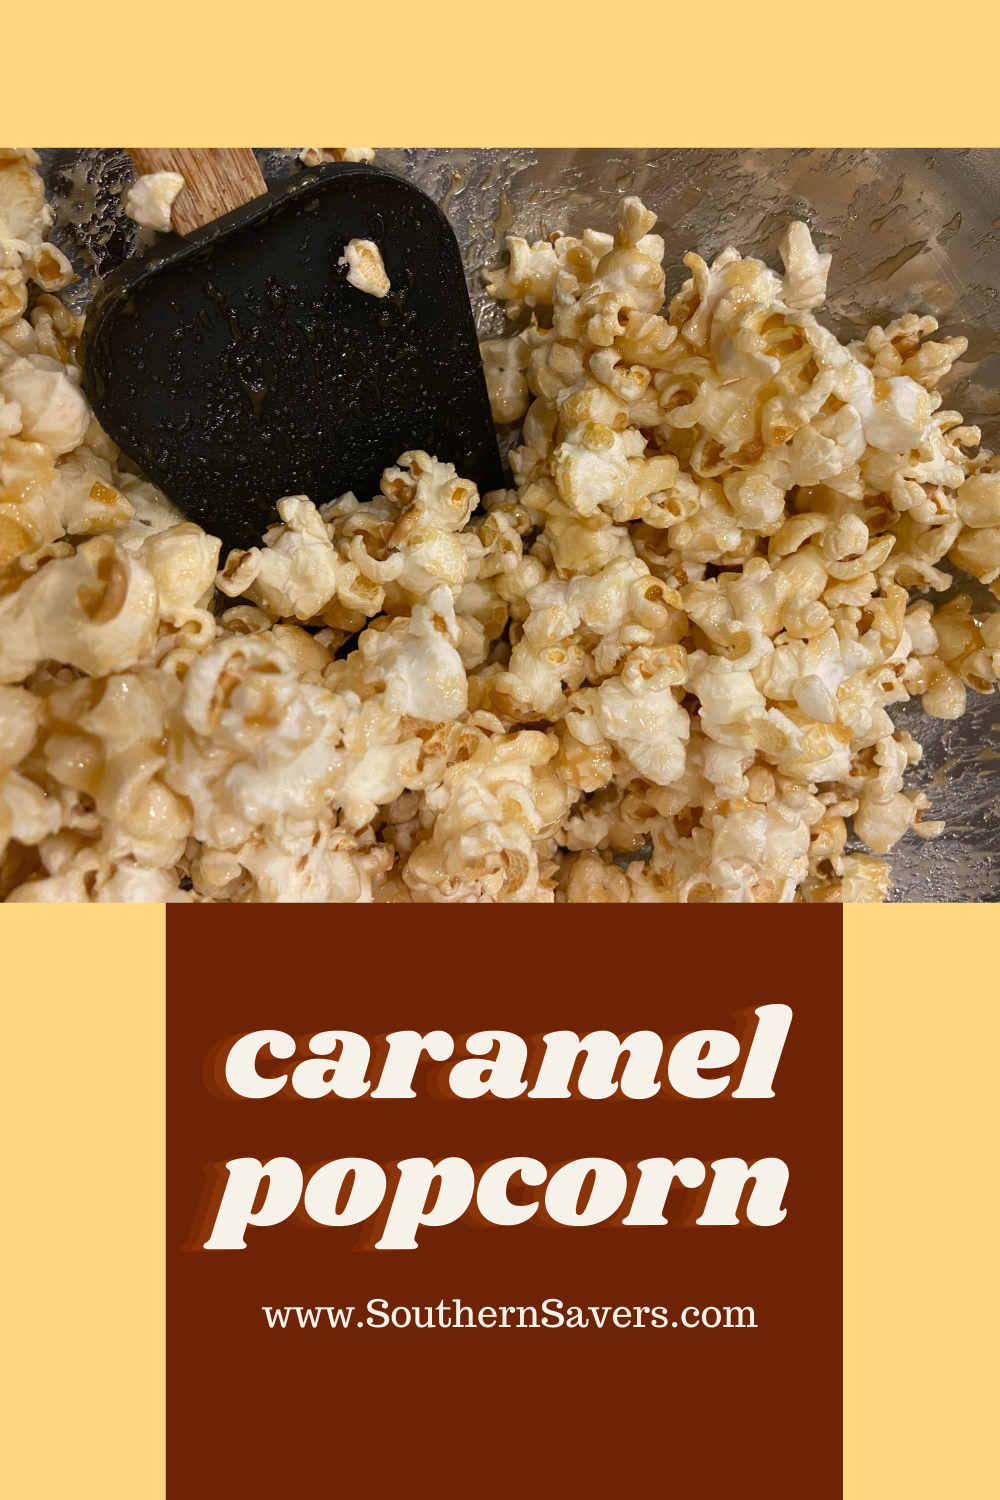 Make movie night even more fun by cooking up an extra special treat. This caramel popcorn is delicious and only takes a few minutes to make!